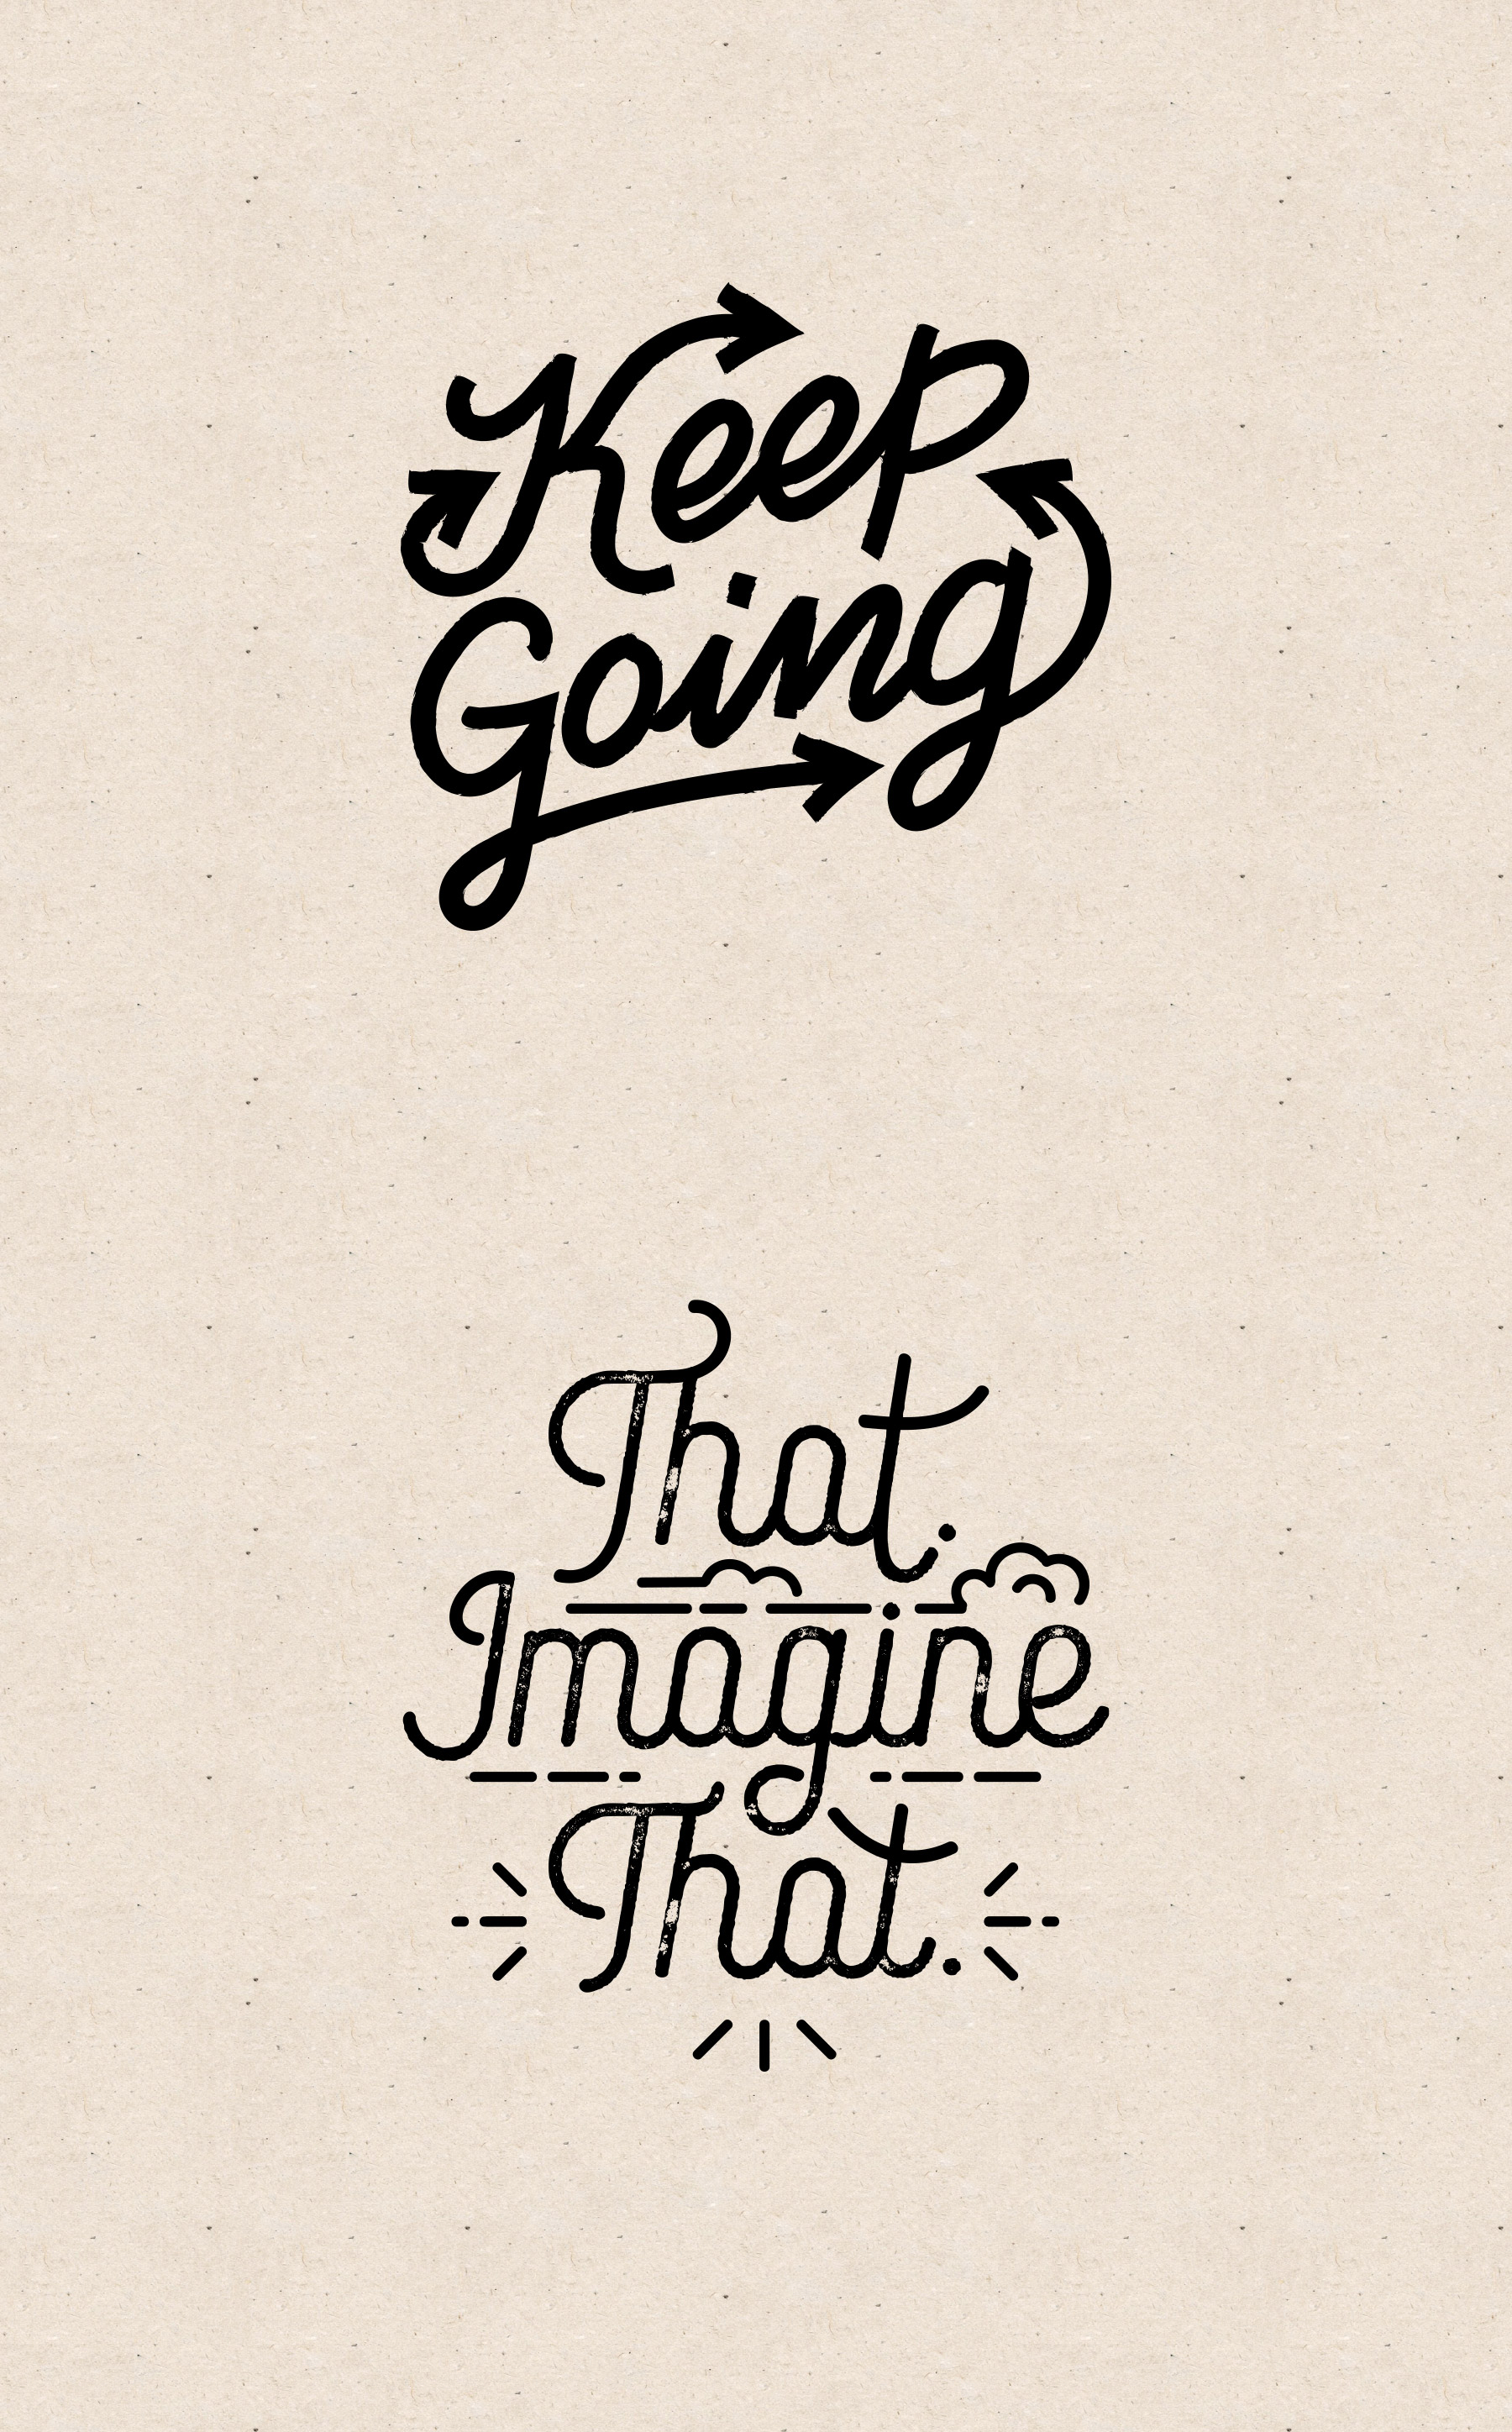 Fun hand lettering for motivational messages